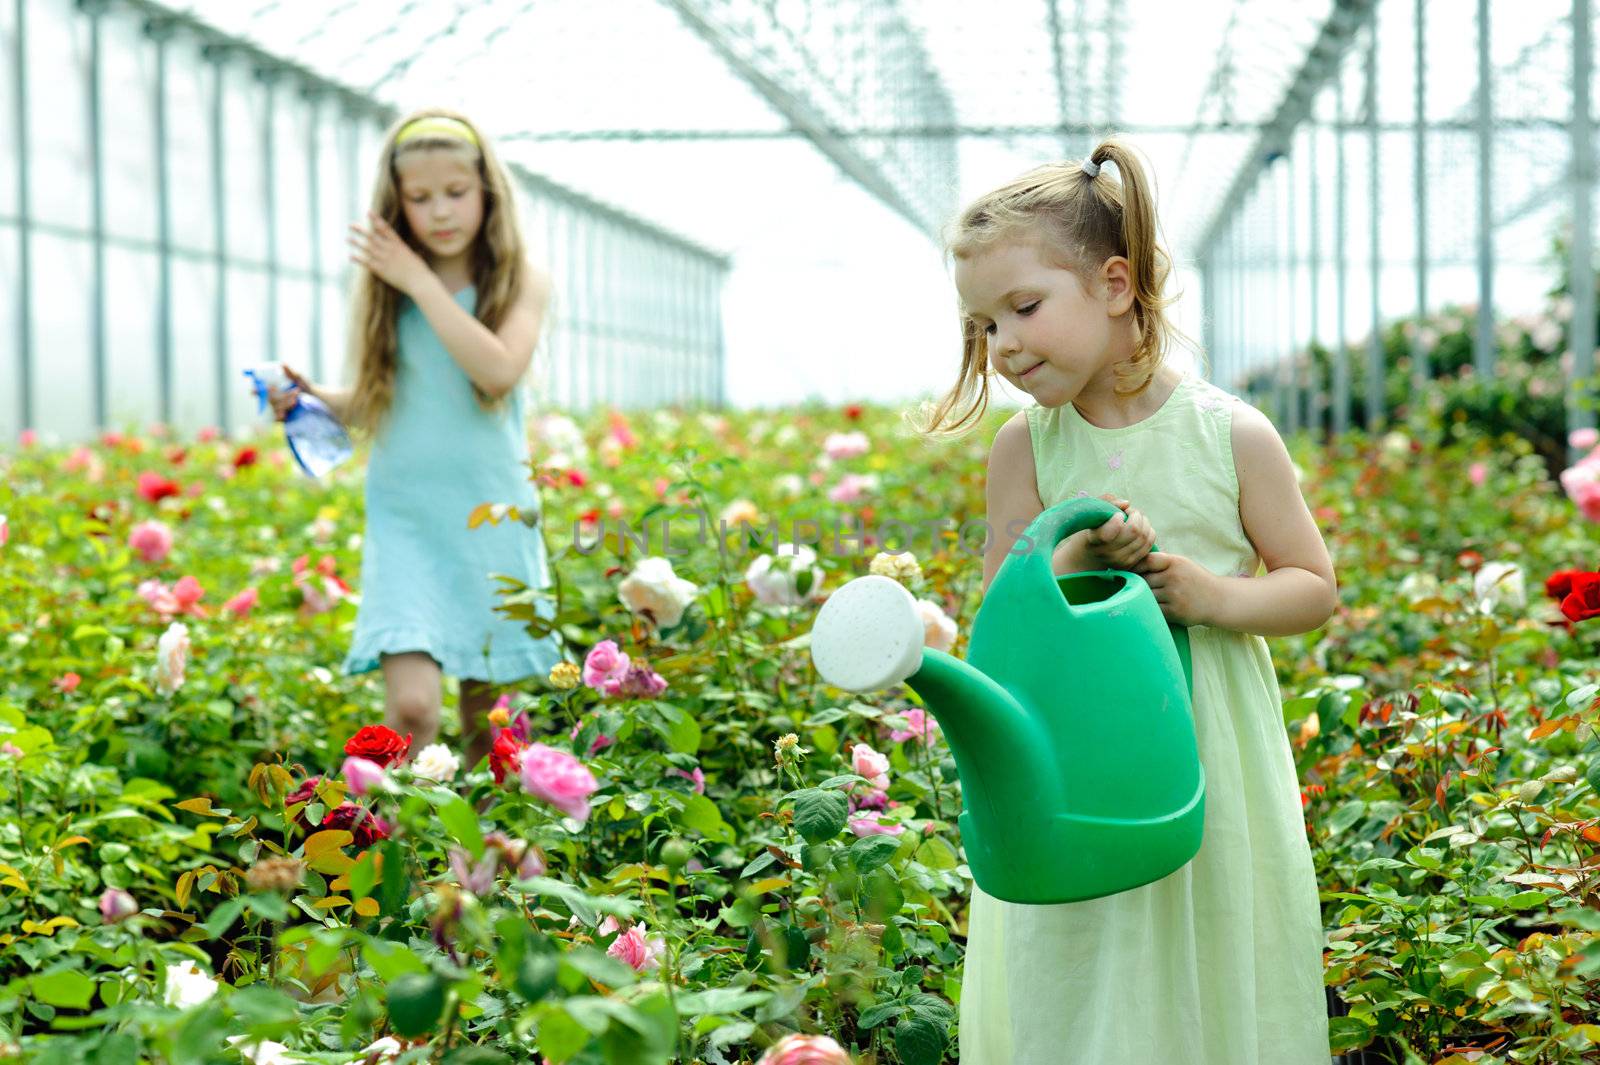 An image of two girls in a greenhouse